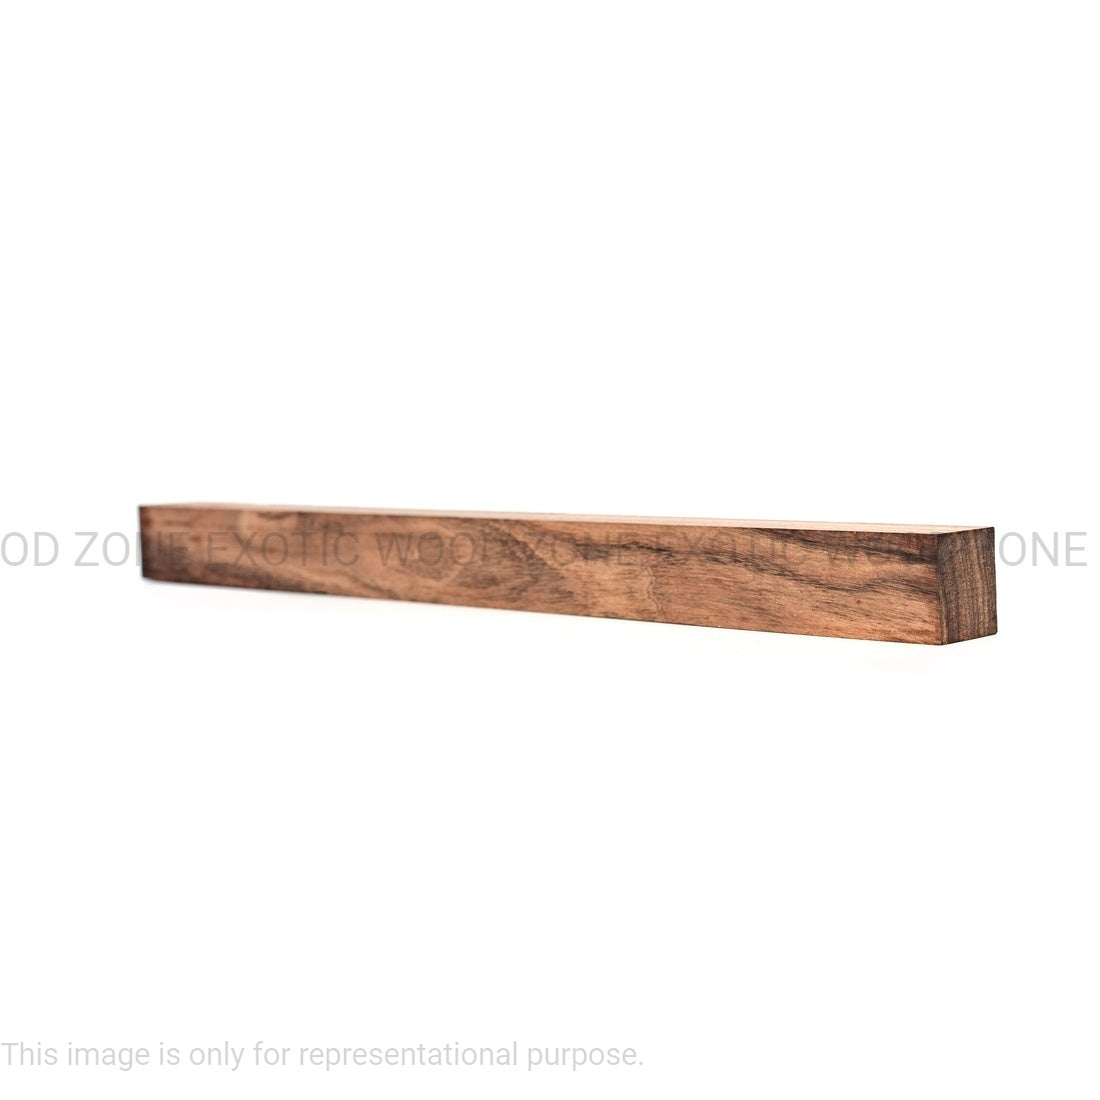 Chechen Hobby Wood/ Turning Wood Blanks 1 x 1 x 12 inches - Exotic Wood Zone - Buy online Across USA 